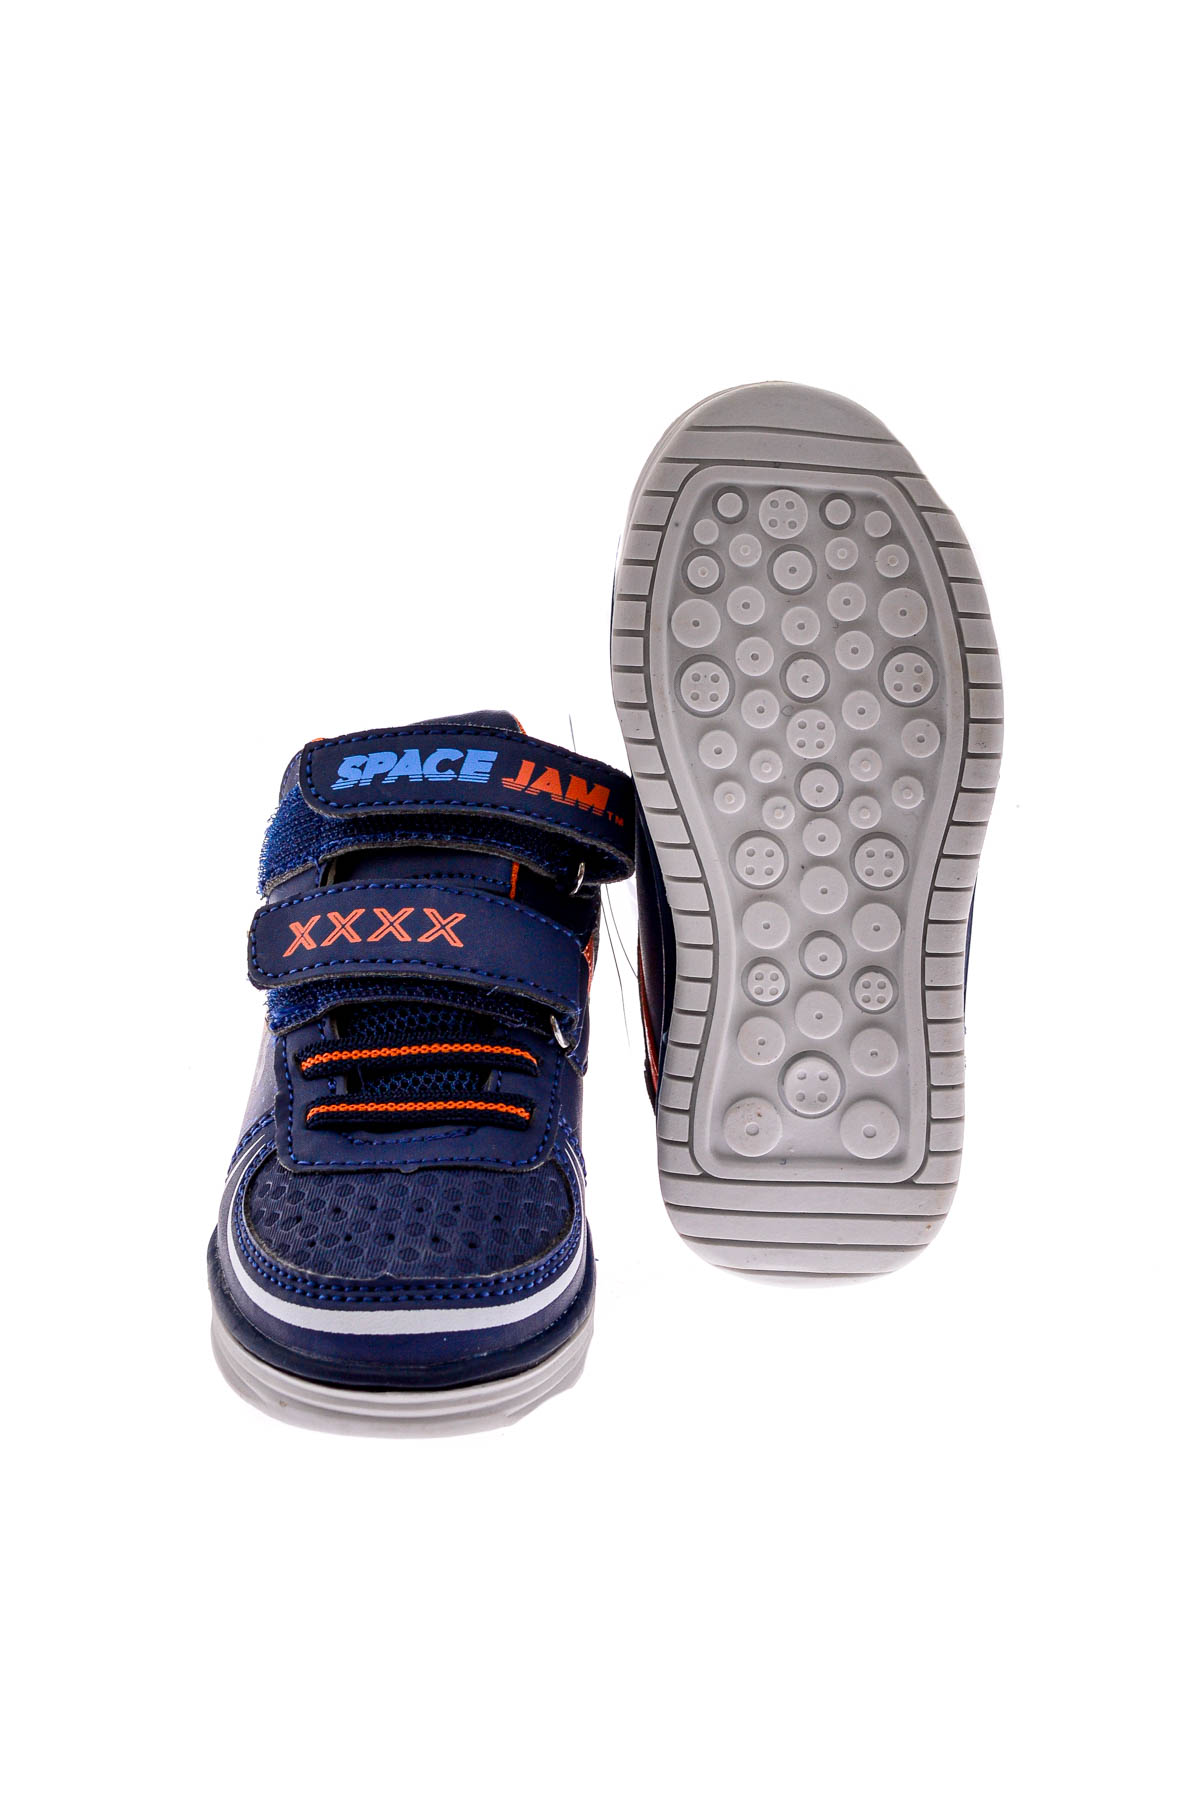 Kids' Shoes - SPACE JAM - 3